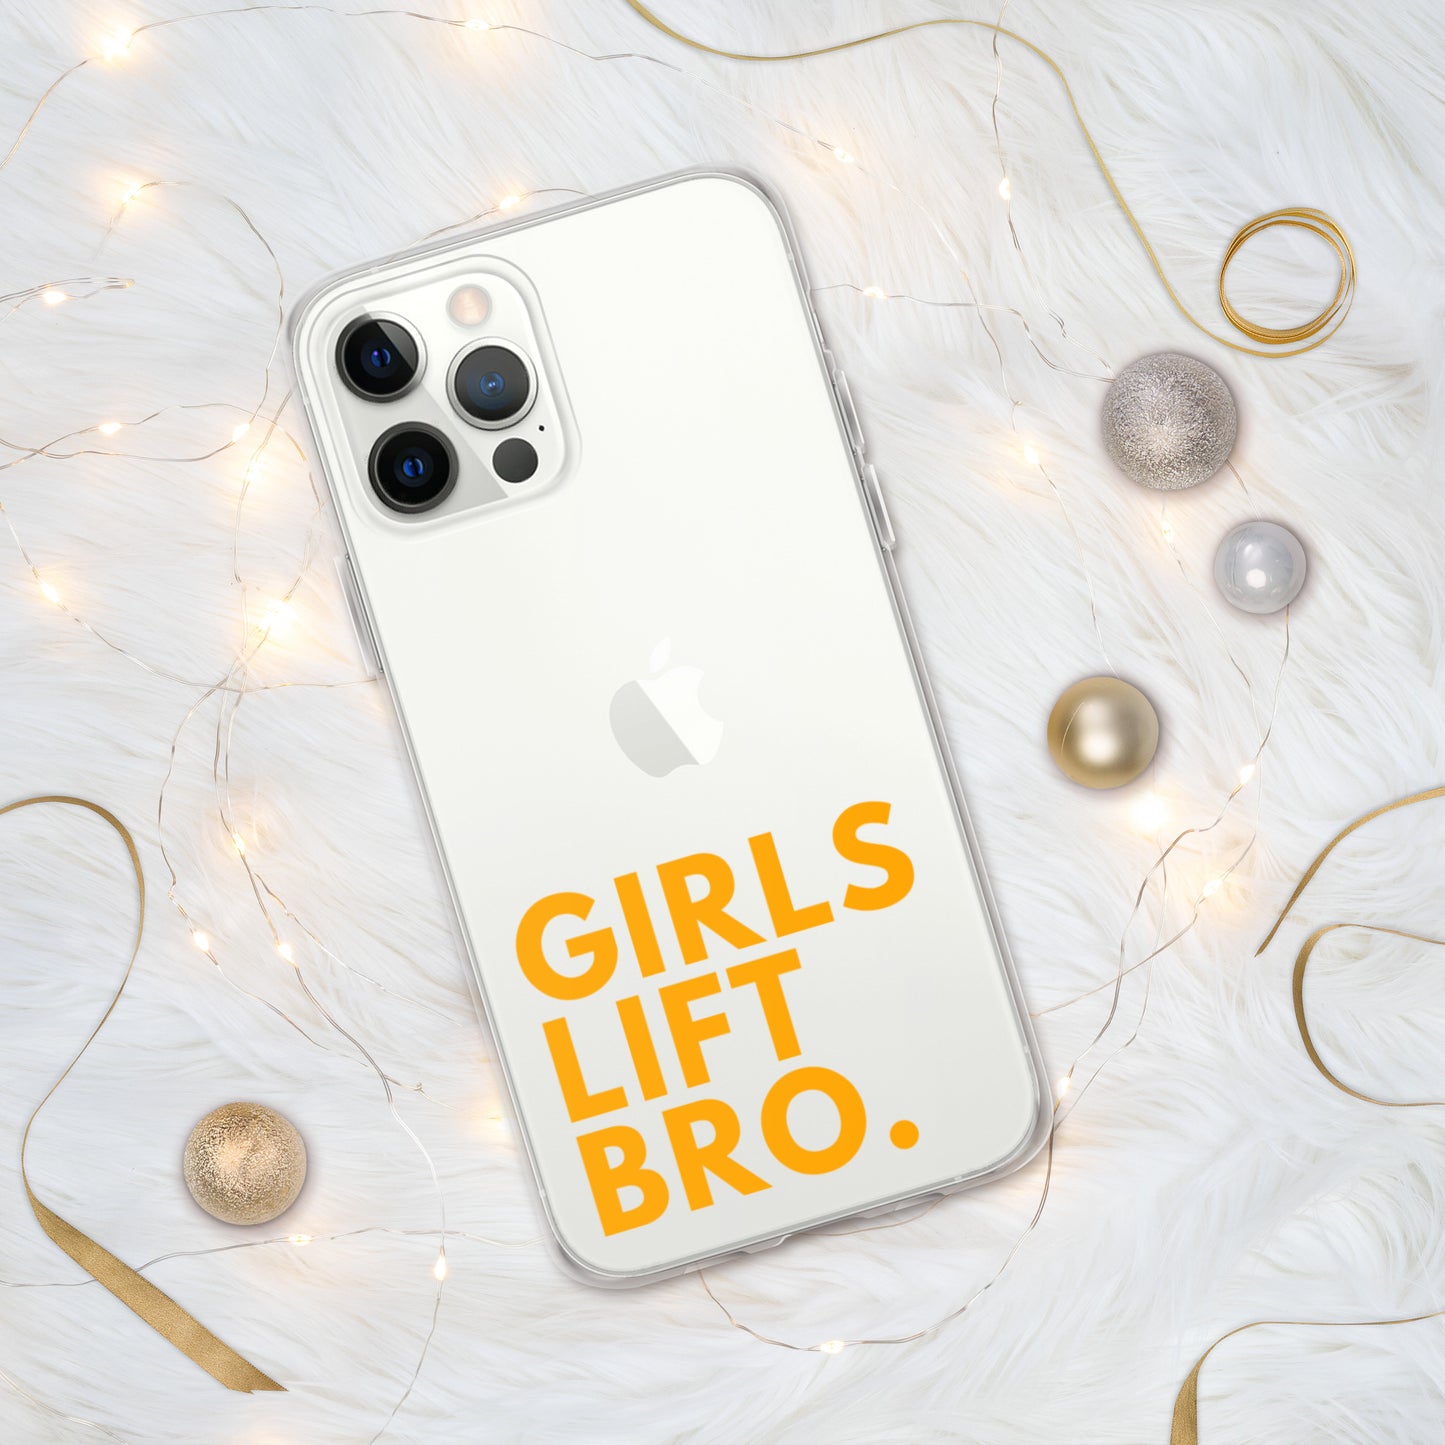 Girls Lift Bro. Clear iPhone Case